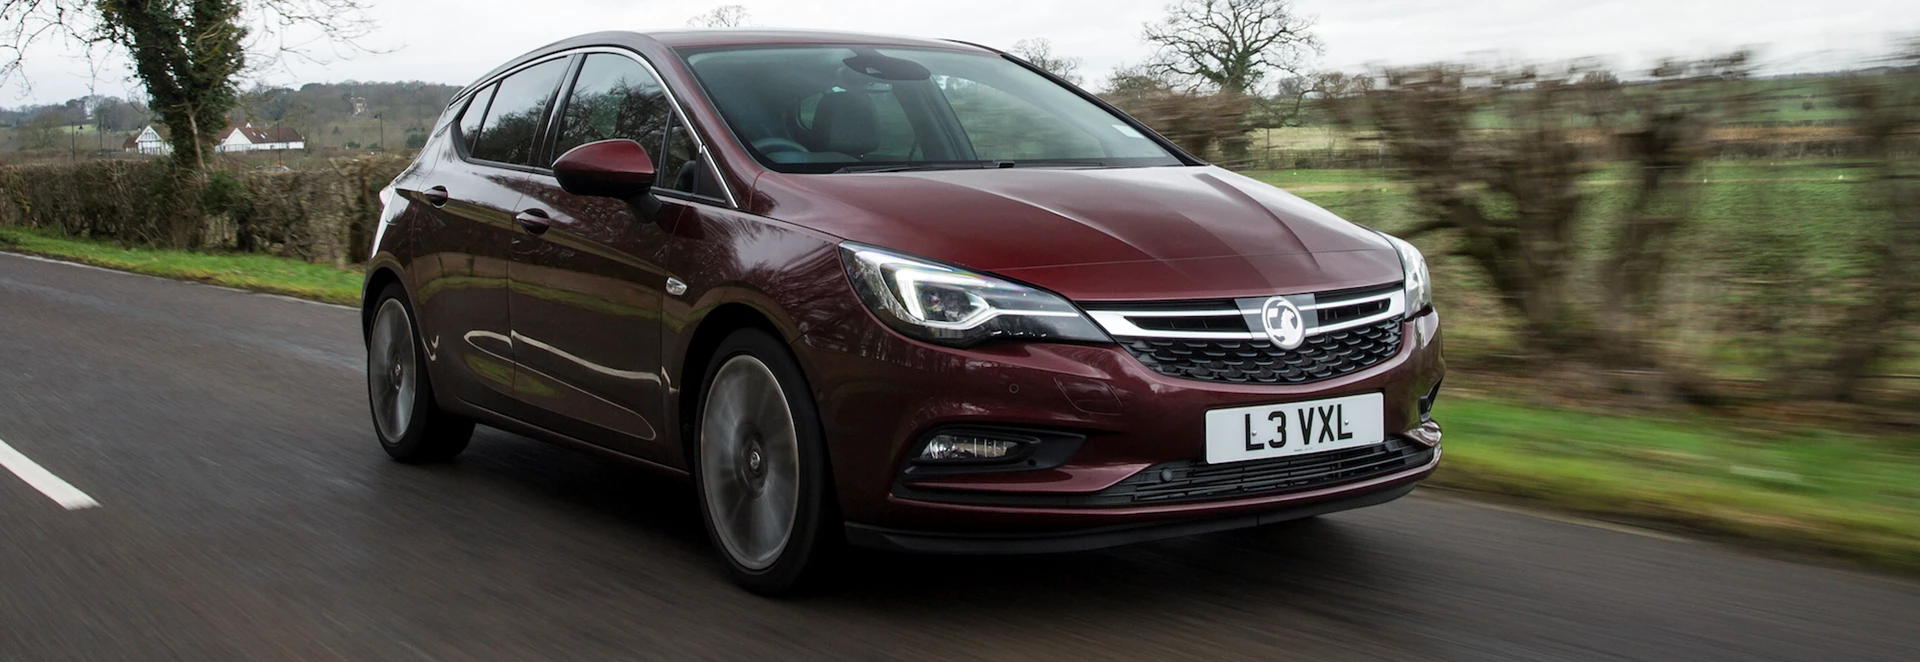 Vauxhall releases new powertrains to Astra line-up 